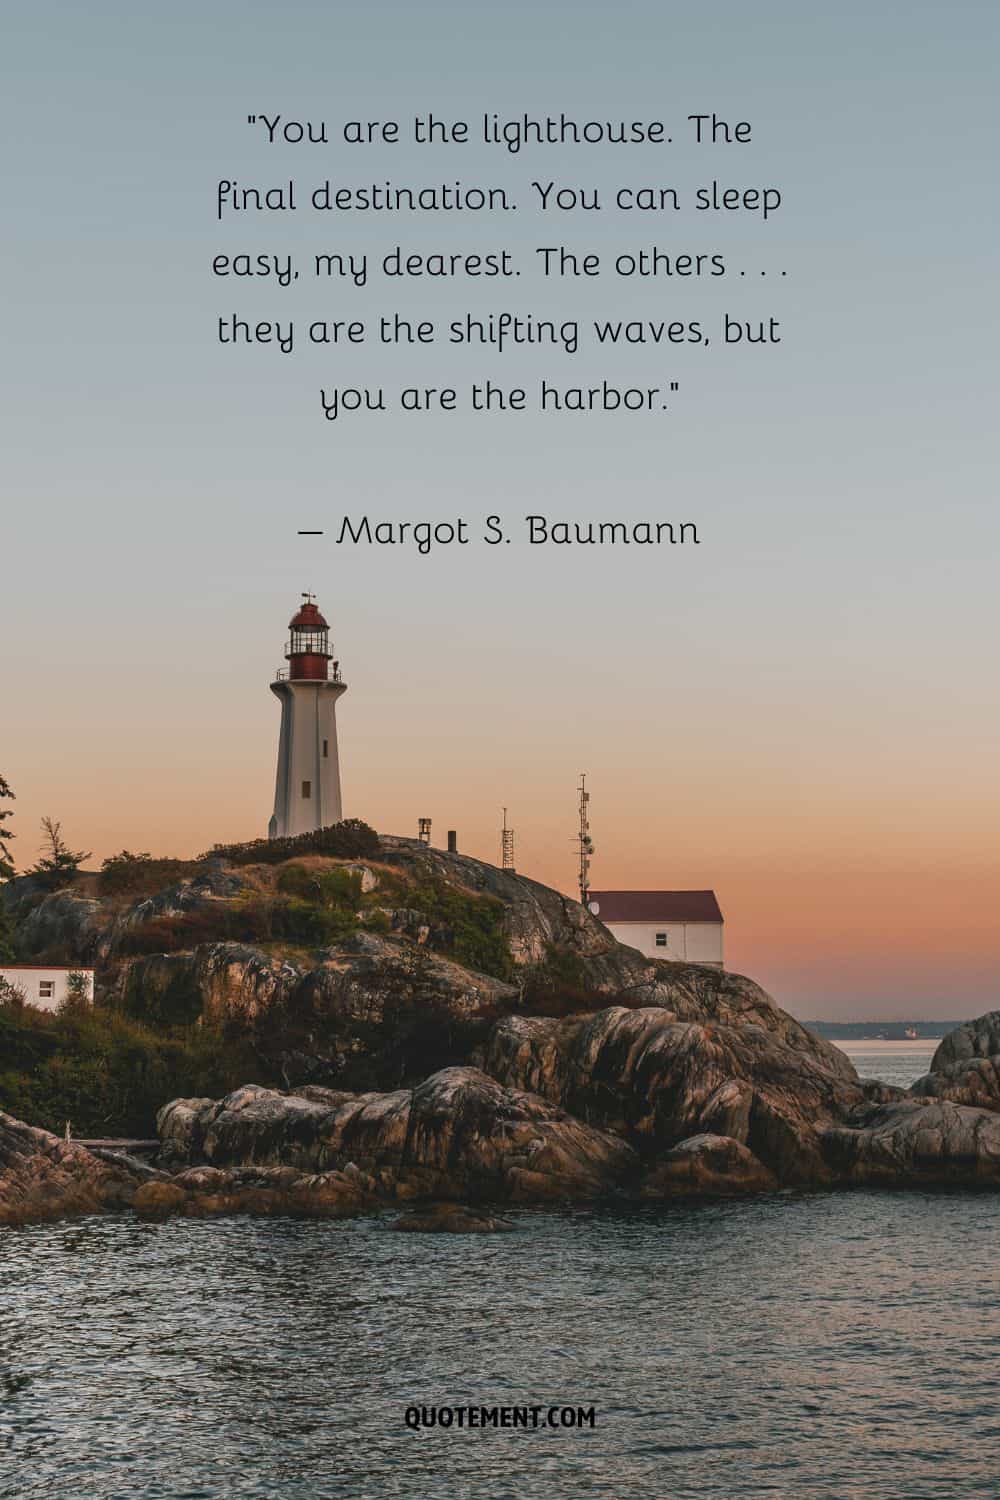 Inspiring quote by Margot S. Baumann and a lighthouse in the background